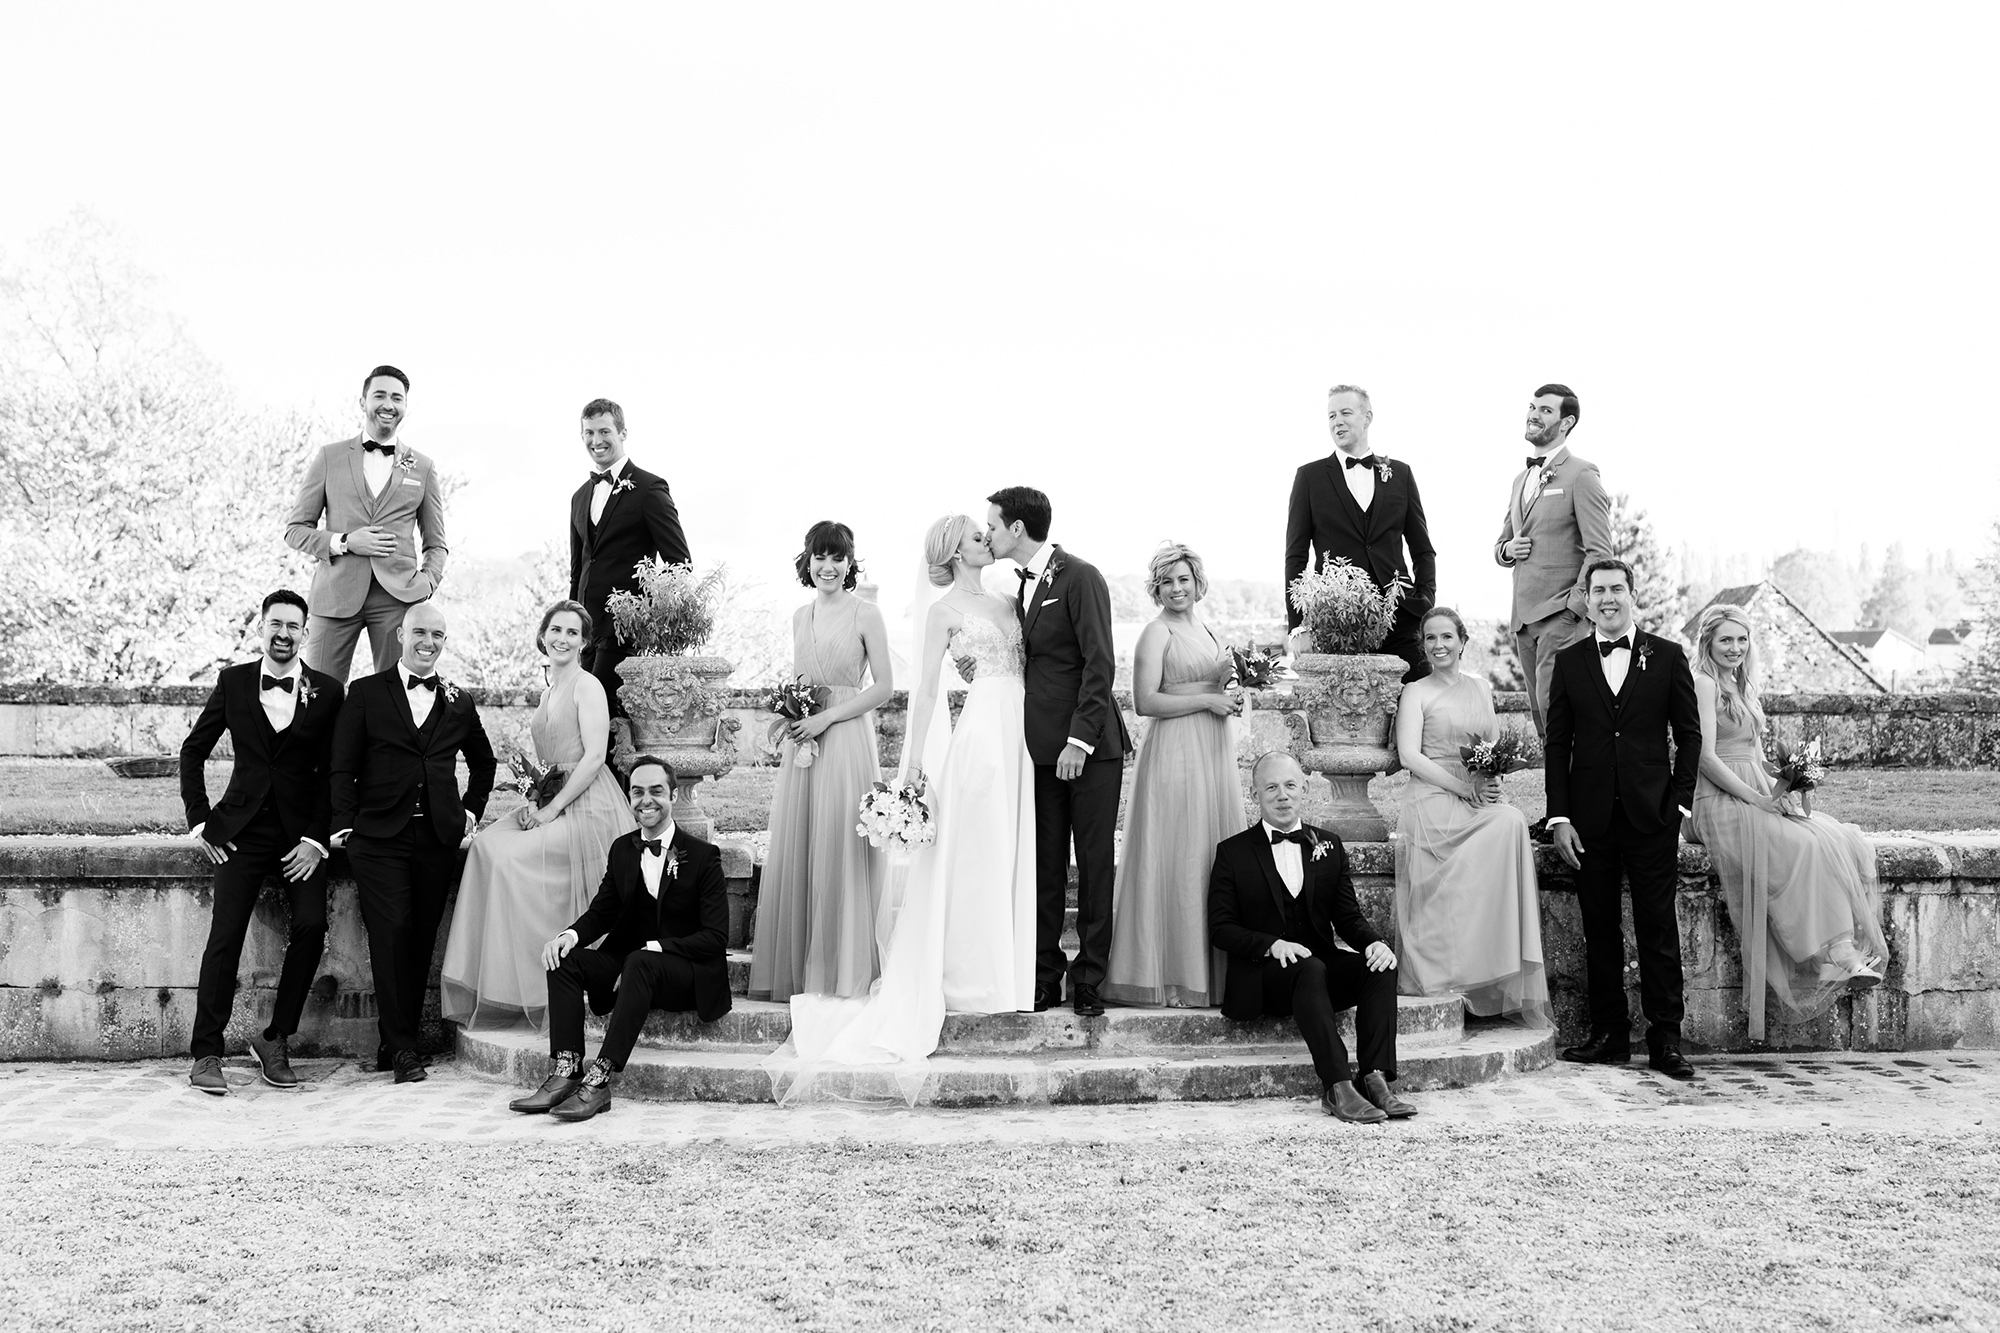 Top tips for group portraits at weddings